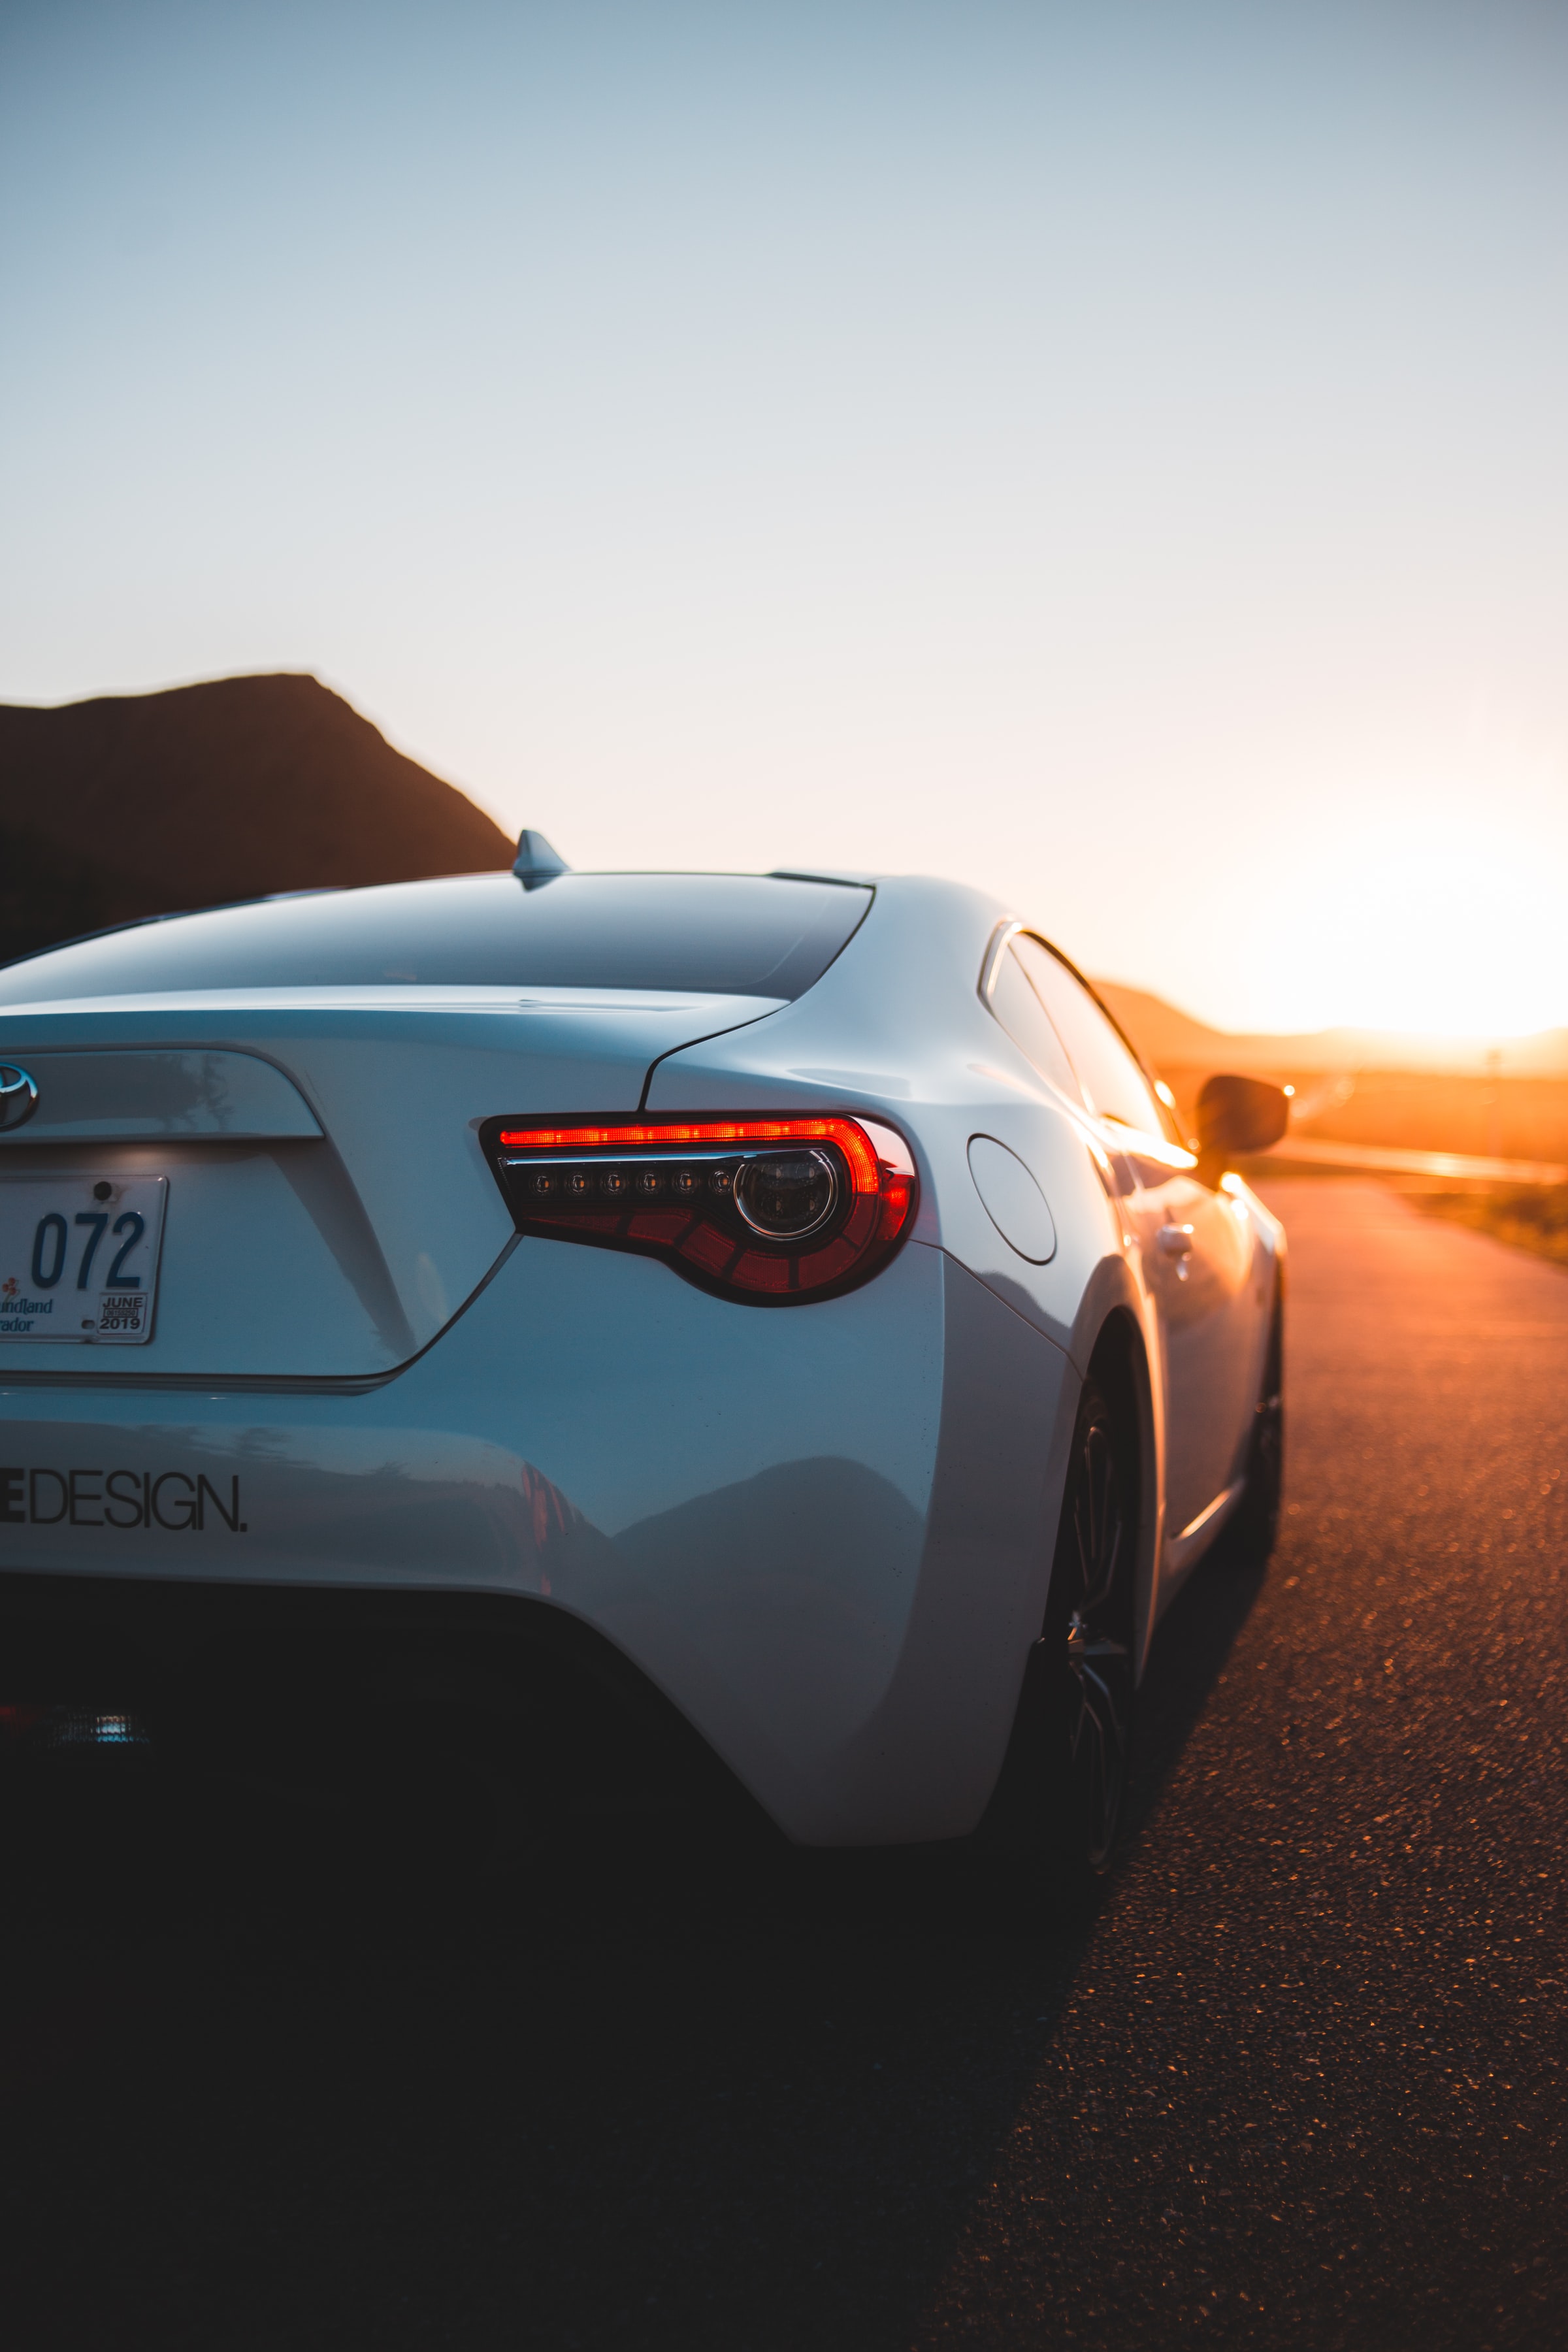 Windows Backgrounds cars, rear view, sports, sunset, toyota, white, car, sports car, back view